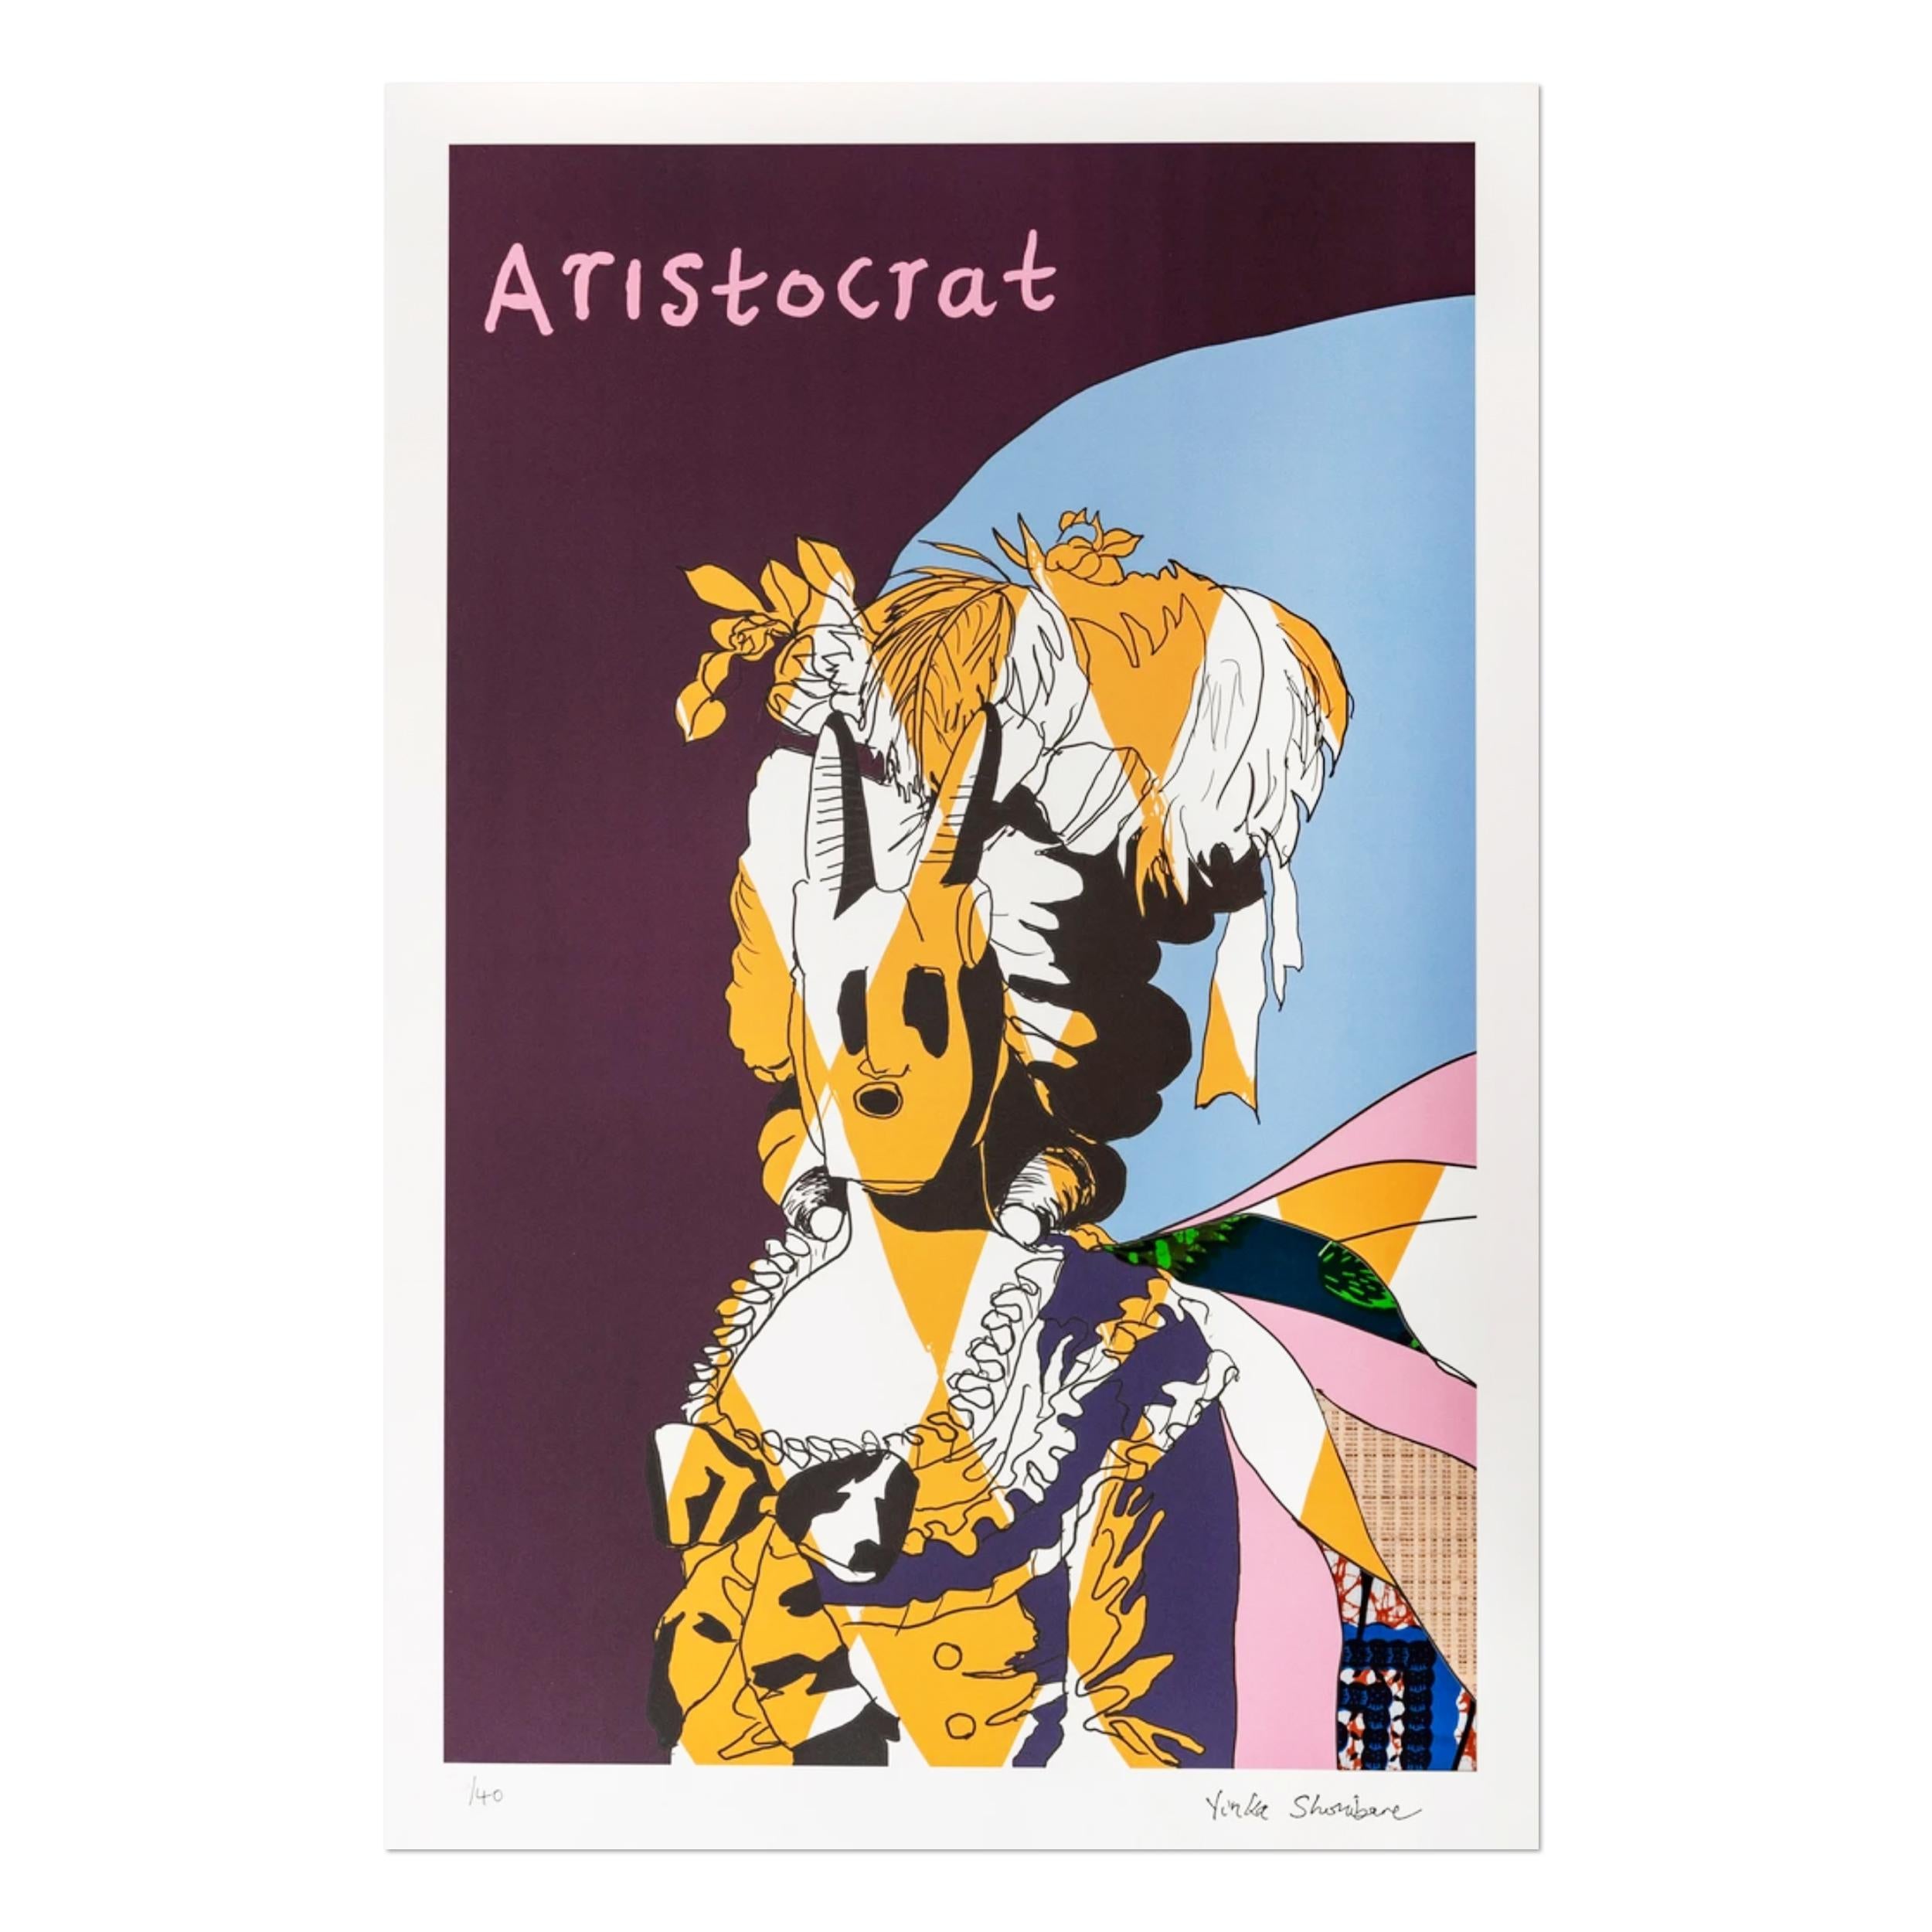 Yinka Shonibare CBE (British, b. 1962)
Aristocrat in Blue, 2020
Medium: Lithograph with collage 
Dimensions: 76 x 49.5 cm
Edition of 40 (slightly varying due to collage elements): Authenticated by the Yinka Shonibare Studio with a stamp and numbered